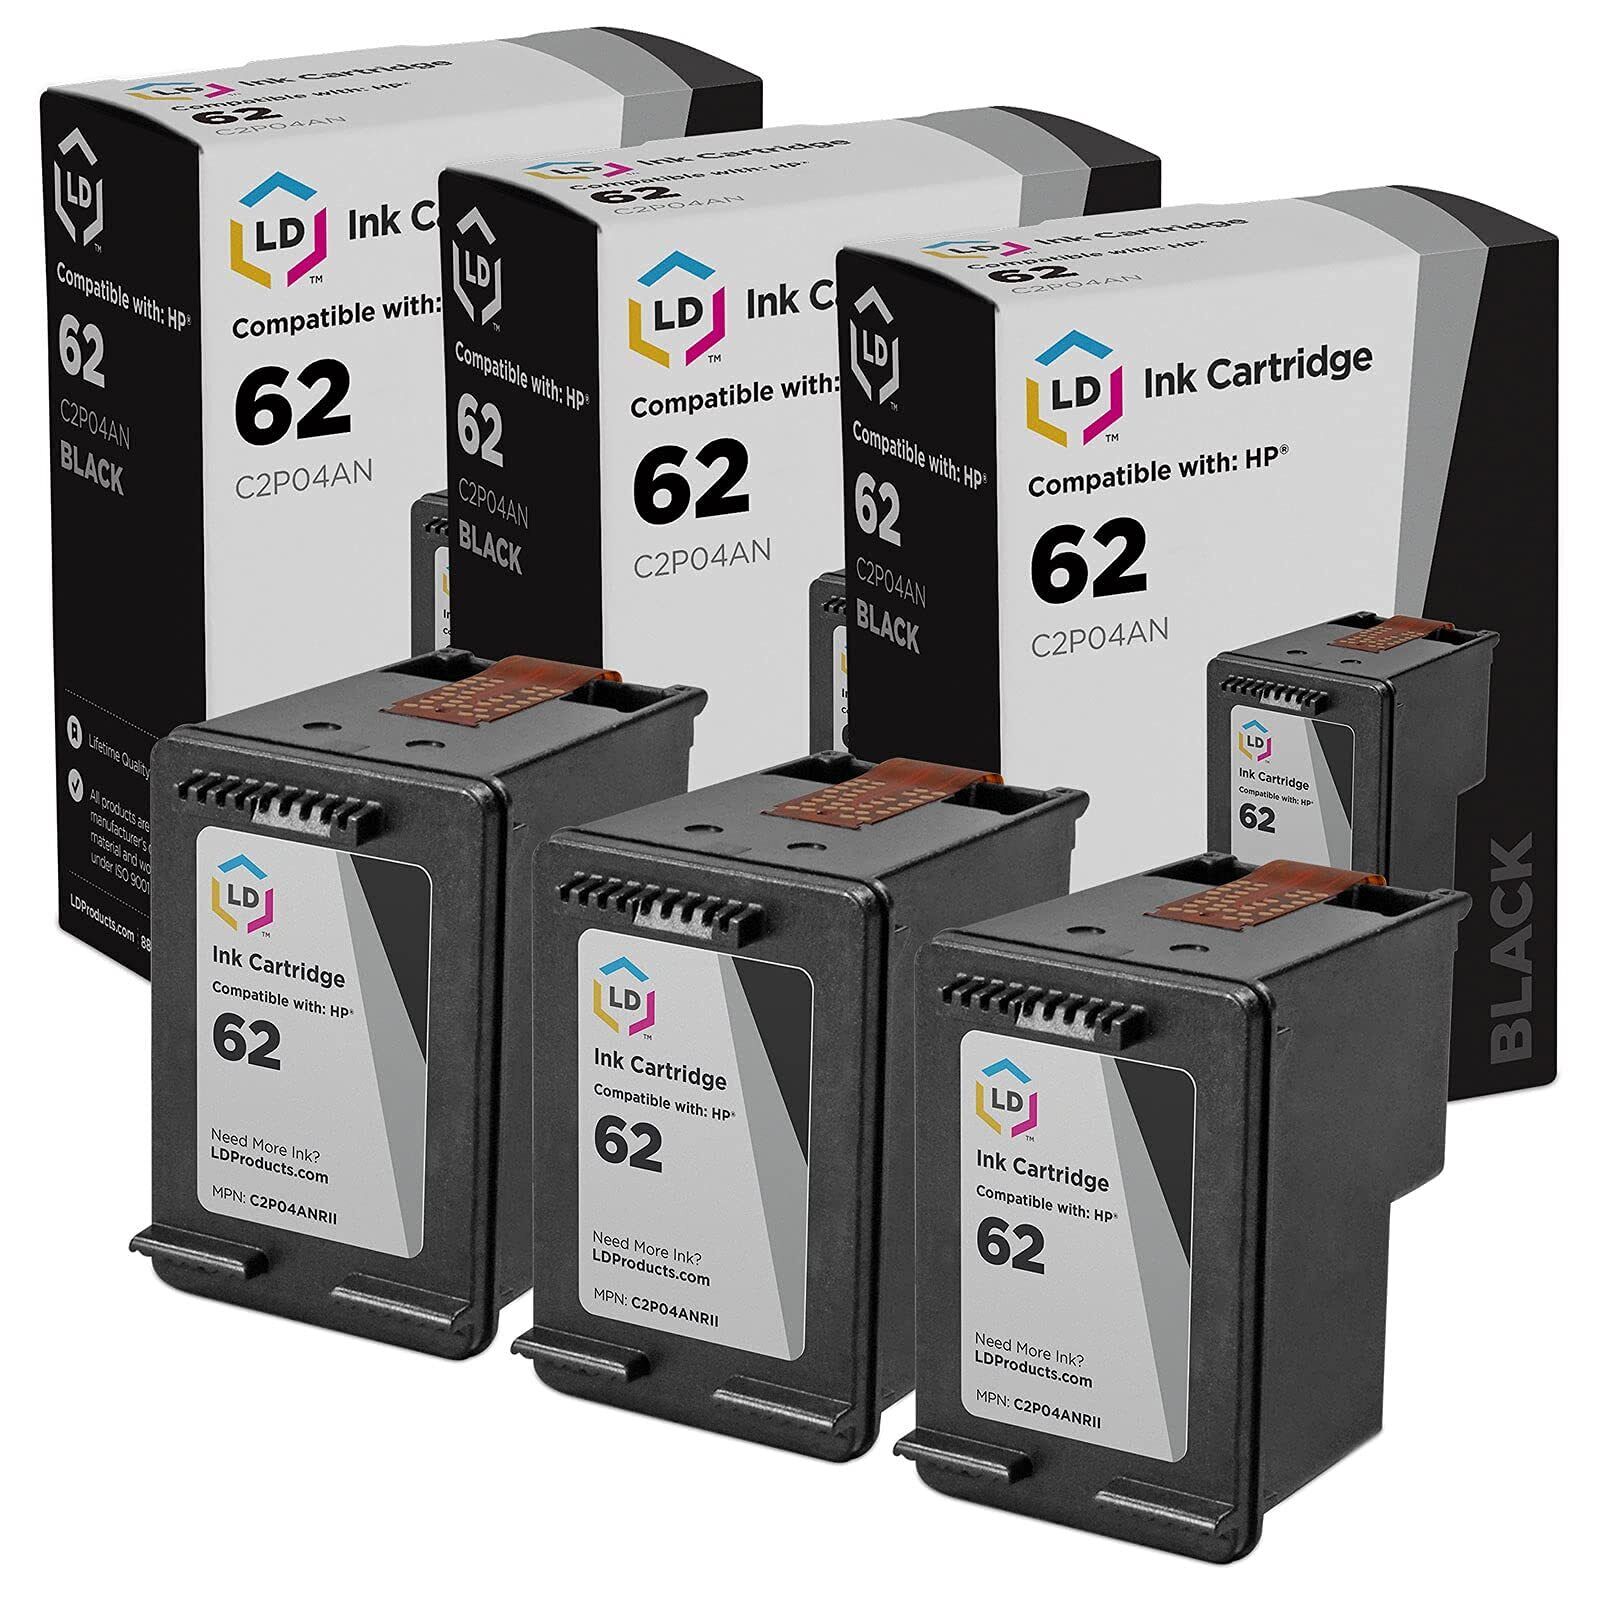 LD Ink Cartridge Replacement for HP 62 C2P04AN (Black, 3-Pack)